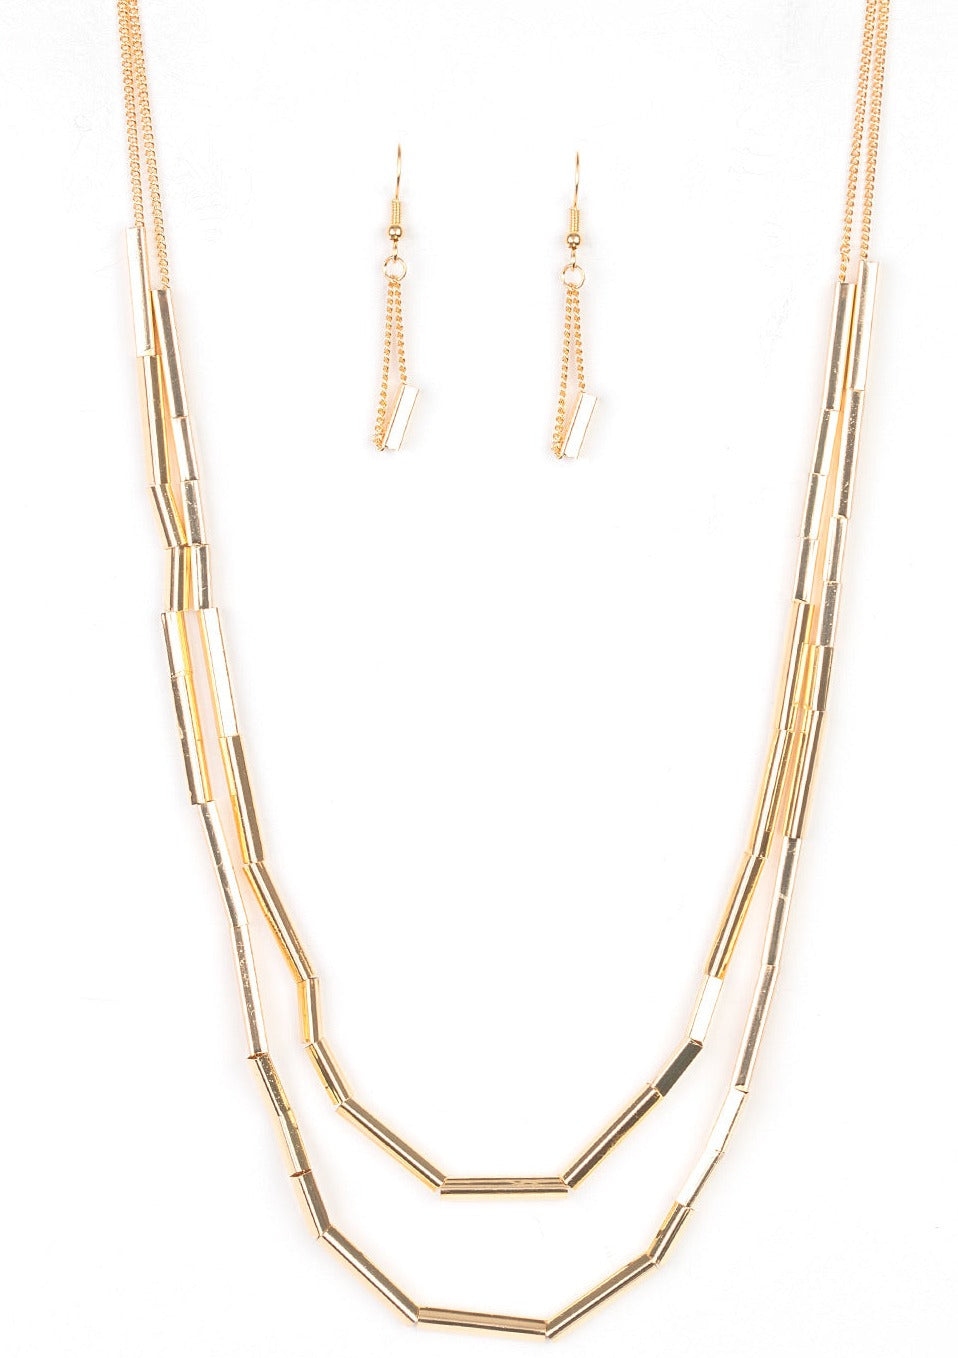 A Pipe Dream - Gold Necklace - TKT’s Jewelry & Accessories 